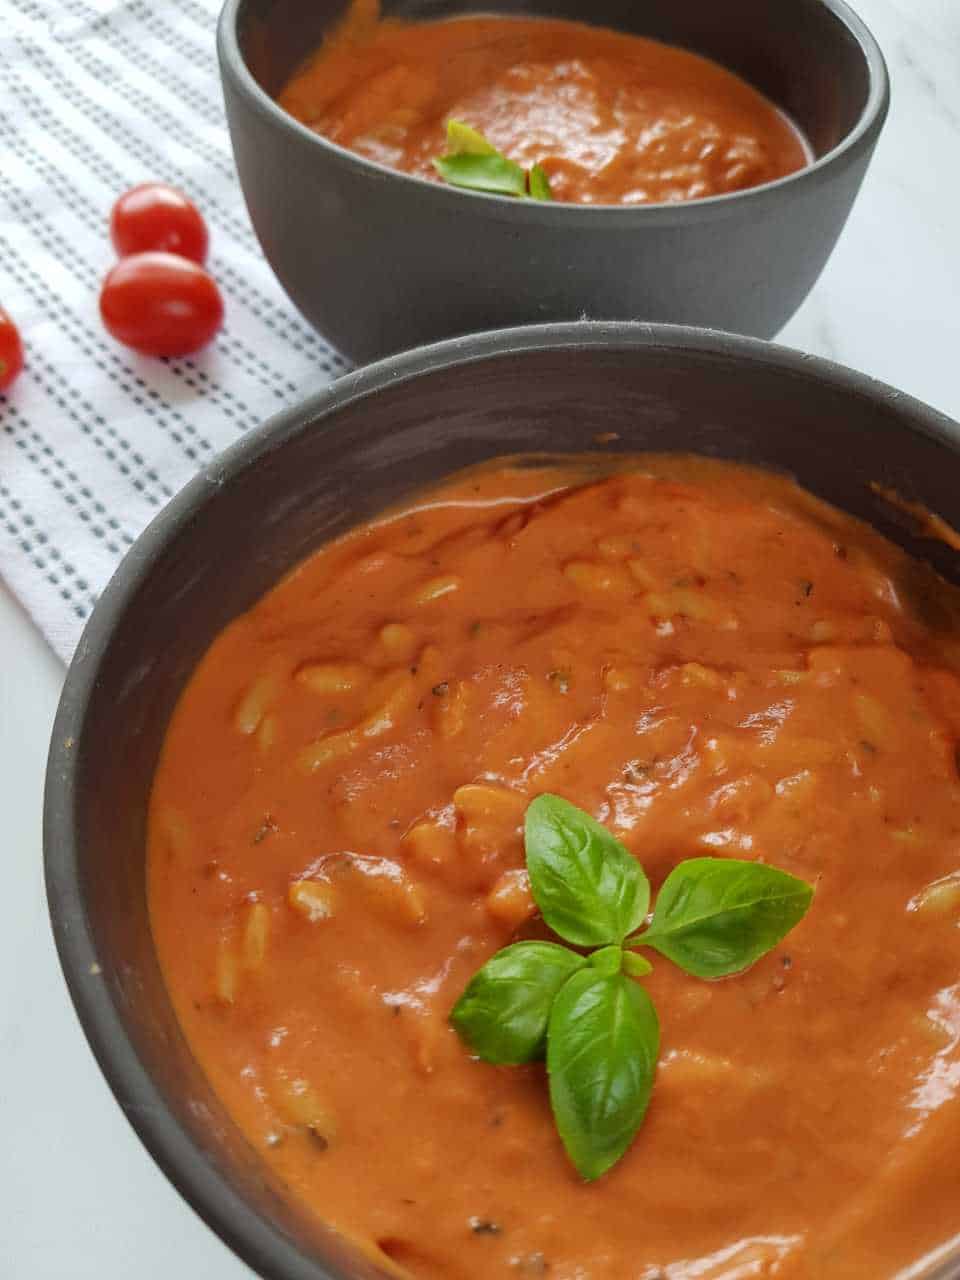 Creamy tomato orzo soup in gray bowls on a white tablecloth.